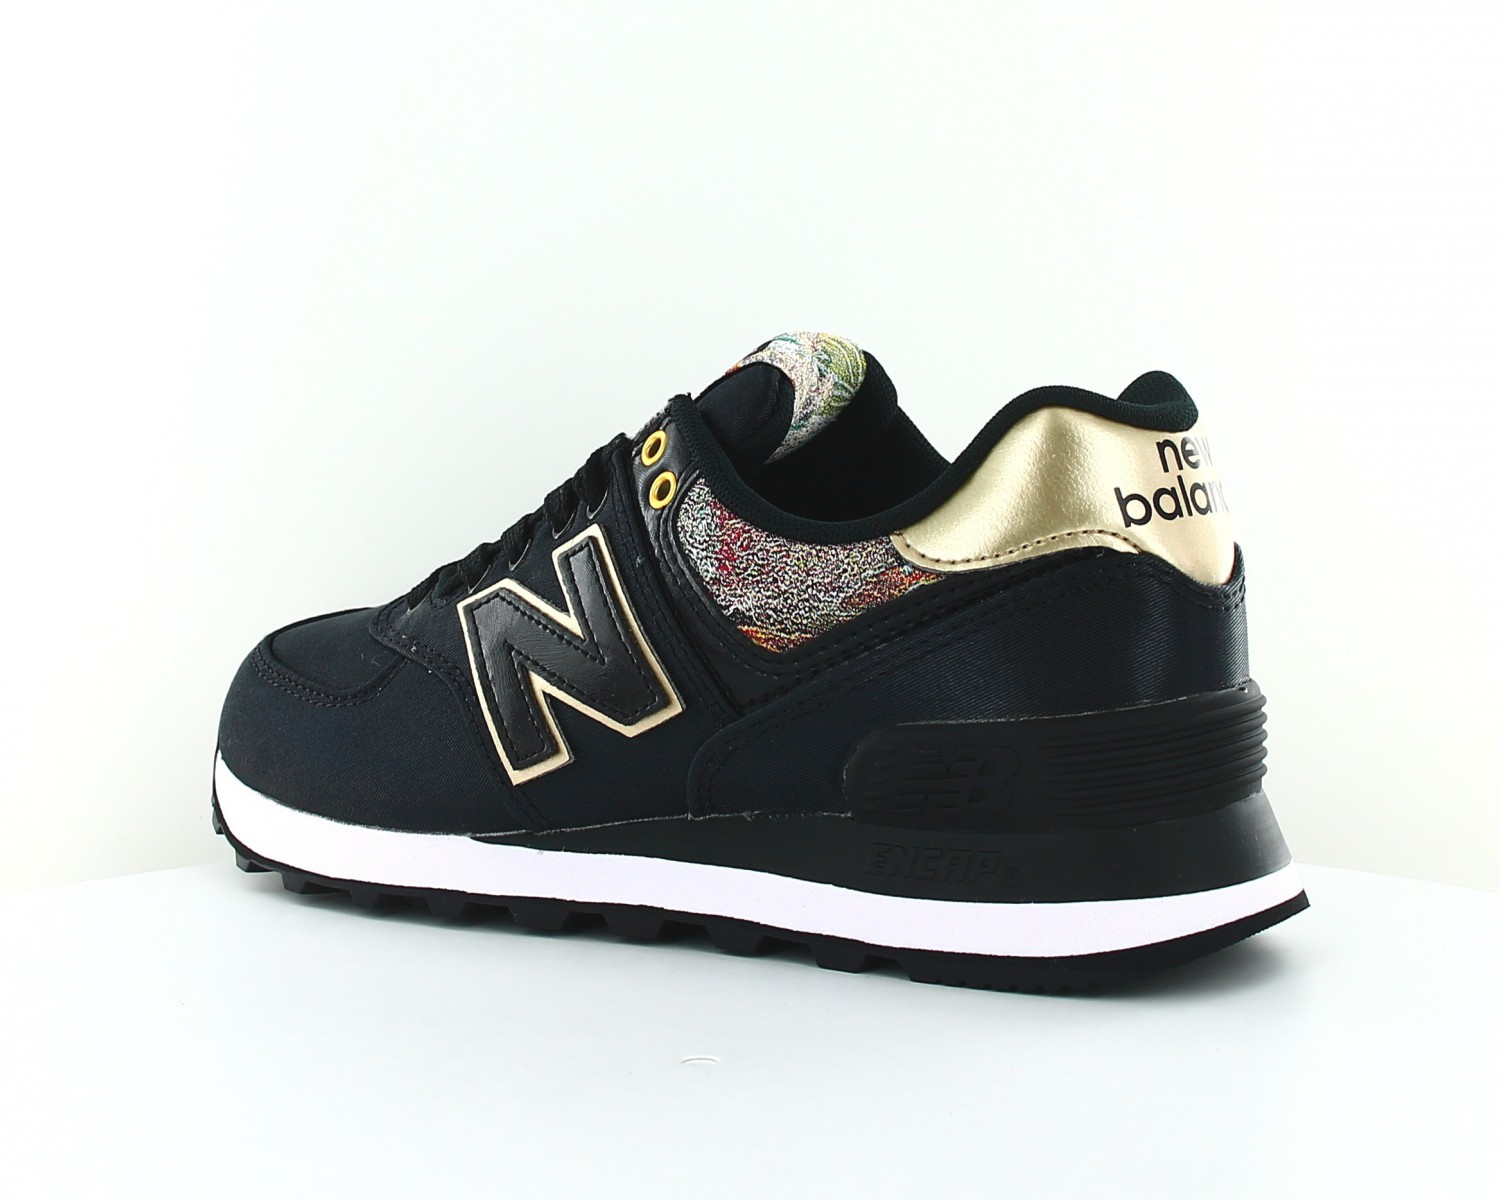 new balance basket femme, OFF 74%,where to buy!